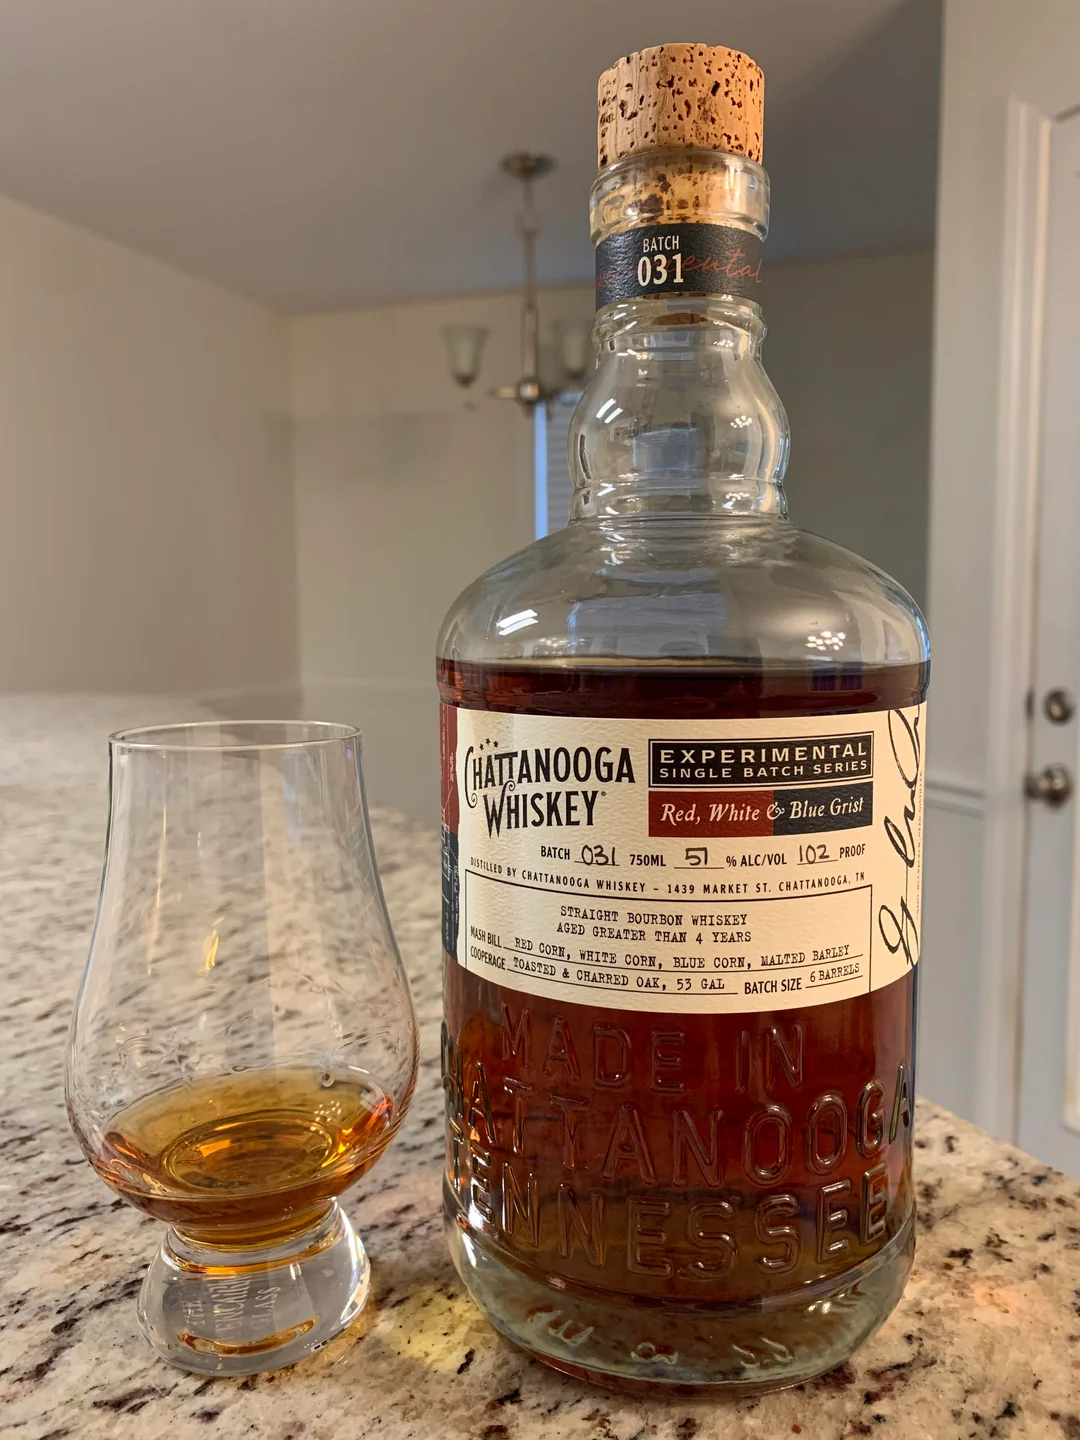 Reddit Review: Chattanooga Whiskey - Red, White, & Blue Grist